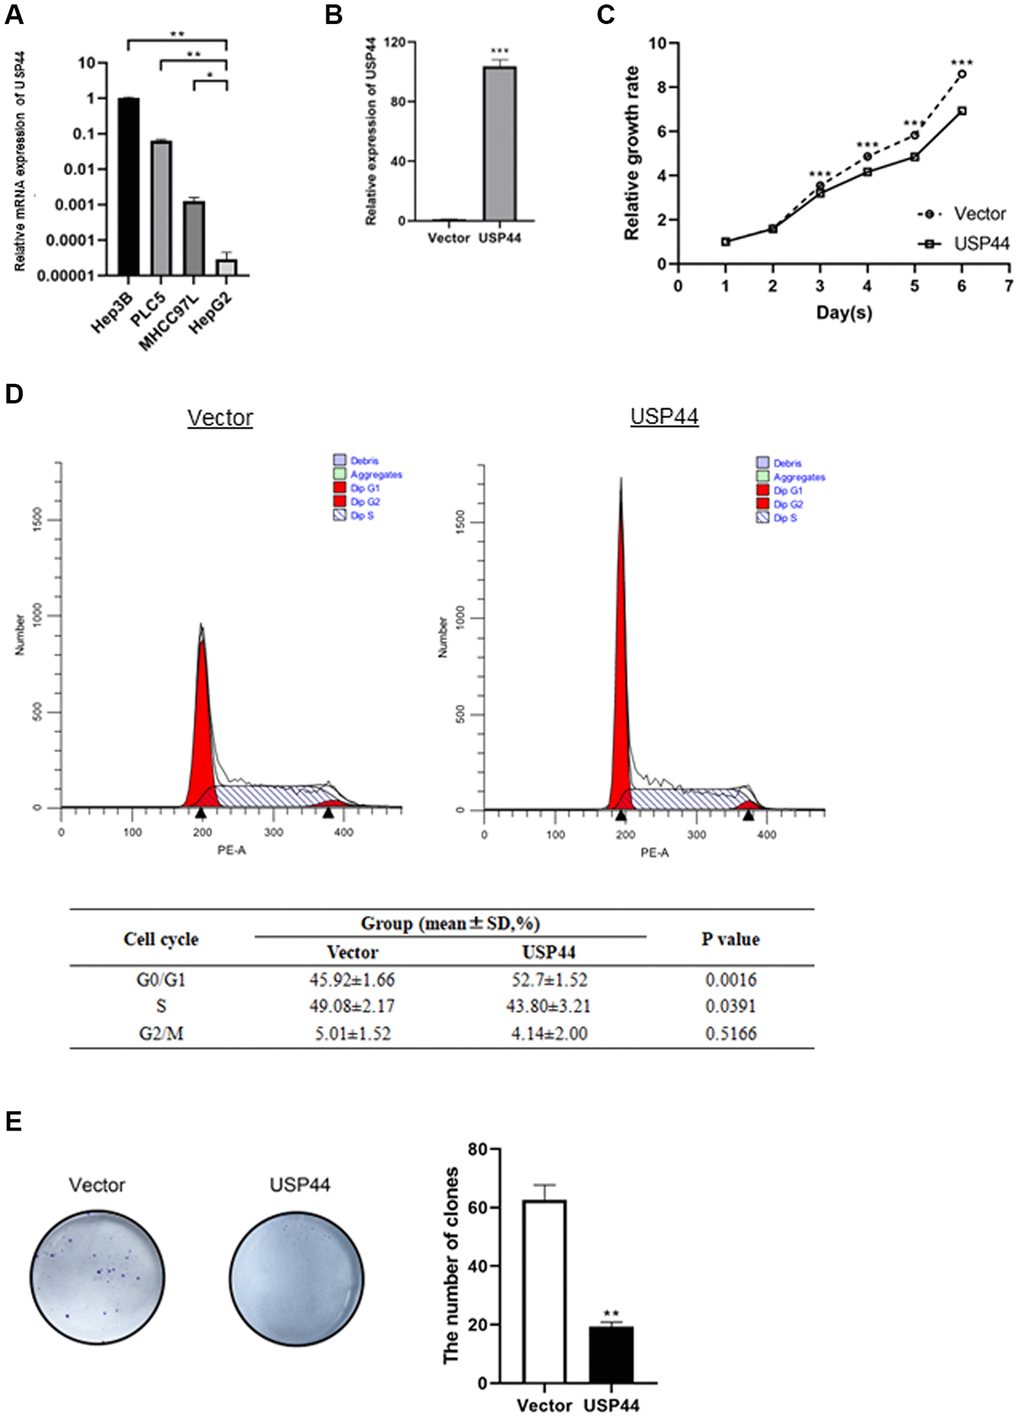 Roles of USP44 in cell proliferation and the cell cycle in hepatocellular carcinoma (HCC). (A) USP44 expression in various HCC cell lines, including Hep3B, PLC5, MHCC97L, and HepG2. USP44 expression was relatively lower in the HepG2 cell line than in other HCC cell lines. (B) Quantitative real-time PCR analysis validated the overexpression of USP44 after lentiviral infection with either USP44 vector or control vector. (C) The CCK-8 assay showed inhibition of HepG2 cell proliferation after USP44 overexpression. Dashed line = control vector HepG2 cells; solid line = USP44-overexpressing HepG2 cells. (D) Flow cytometry analysis with propidium iodide staining shows cell cycle arrest at the G0/G1 phase in USP44-overexpressing HepG2 cells. (E) USP44 overexpression was associated with reduced colony formation by HepG2 cells. Colony formation was assessed 10 days after 1000 cells were seeded onto a 6-well plate.